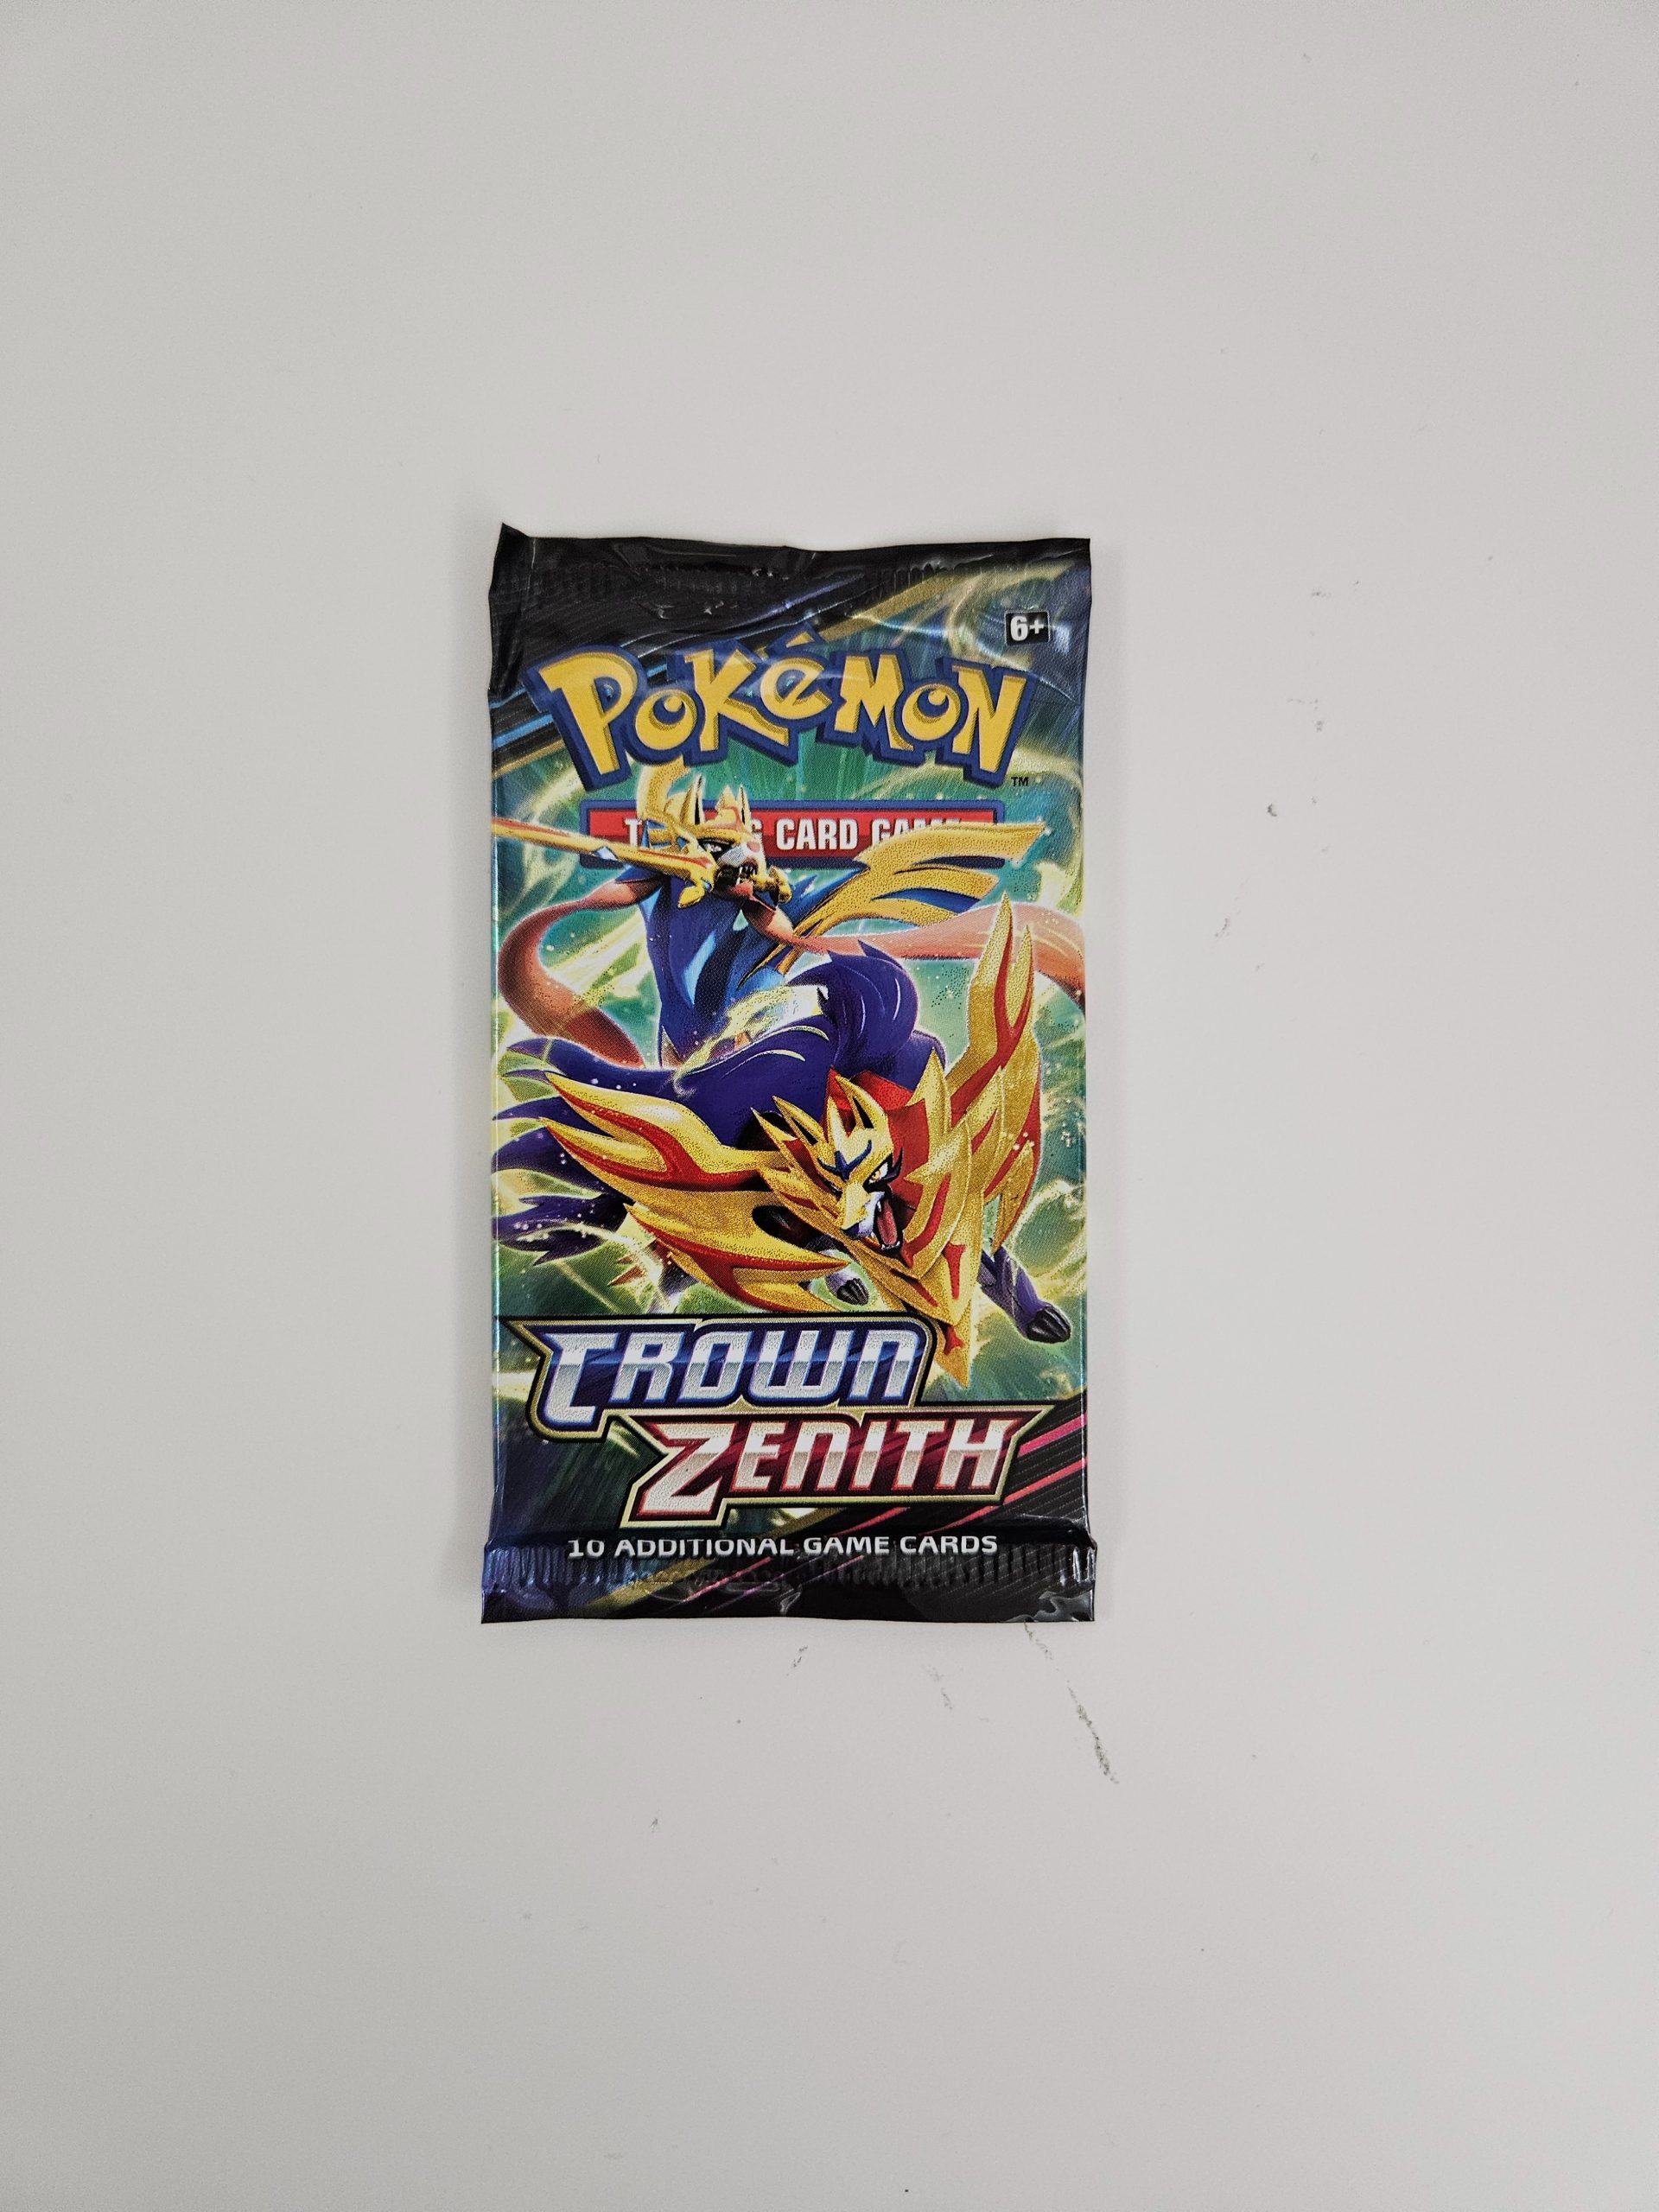 Crown zenith booster pack